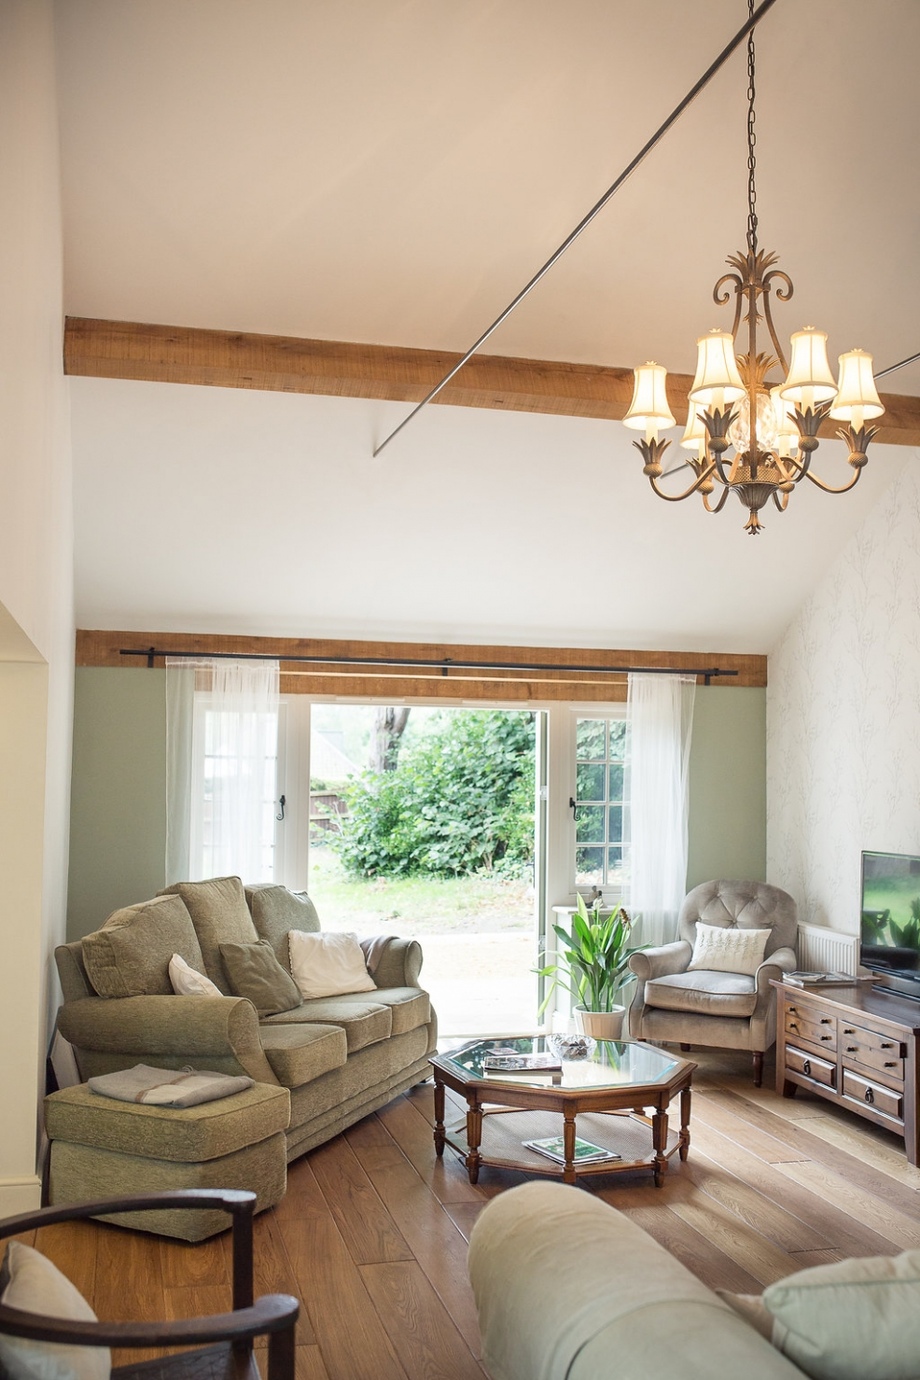 Garden Room with Exposed Beams and French Windows